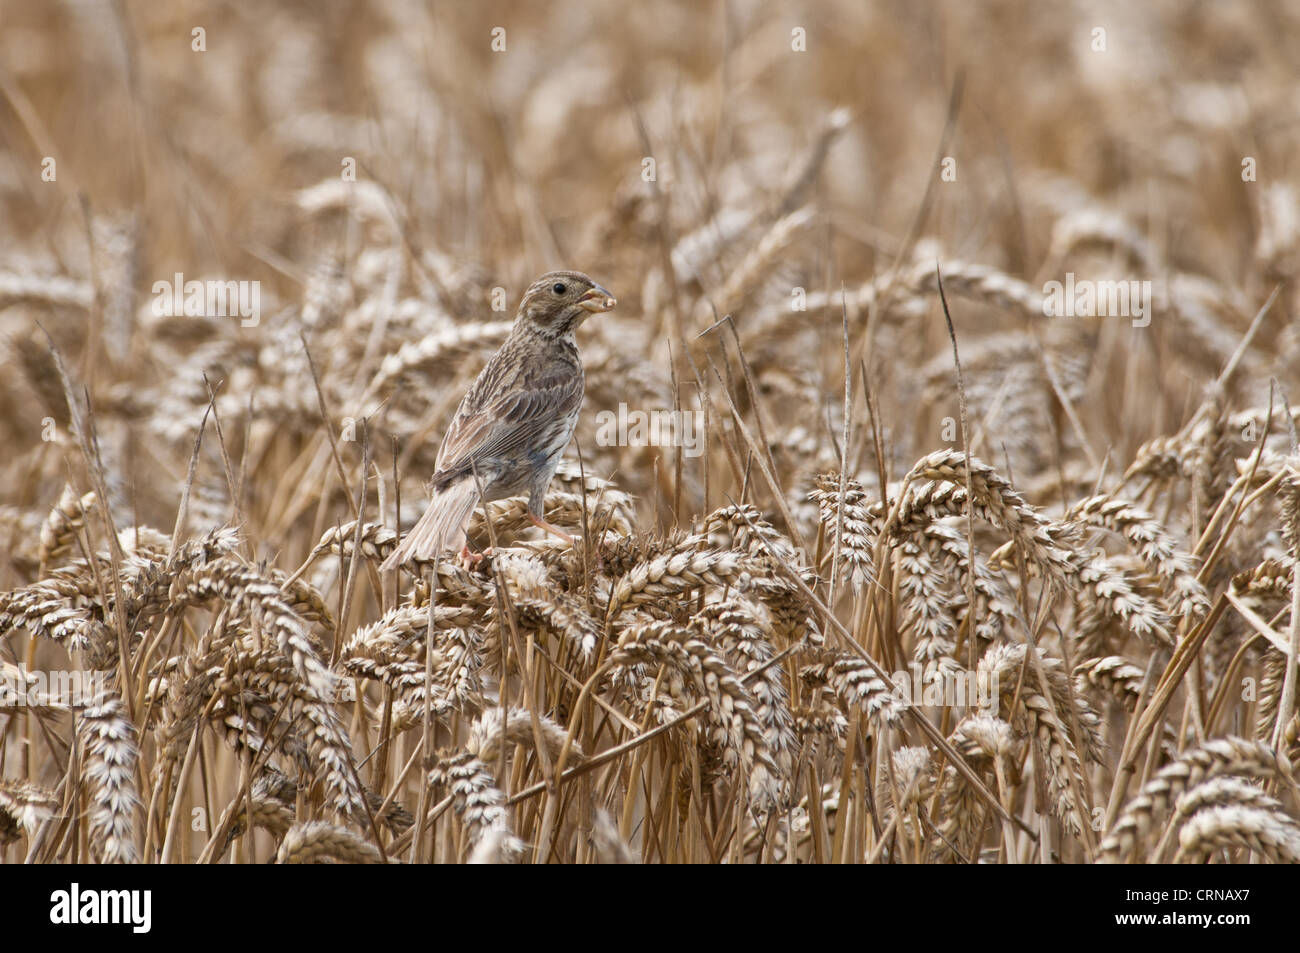 Corn Bunting (Miliaria calandra) adult, feeding on grain in ripening wheat crop, Isle of Sheppey, Kent, England, august Stock Photo